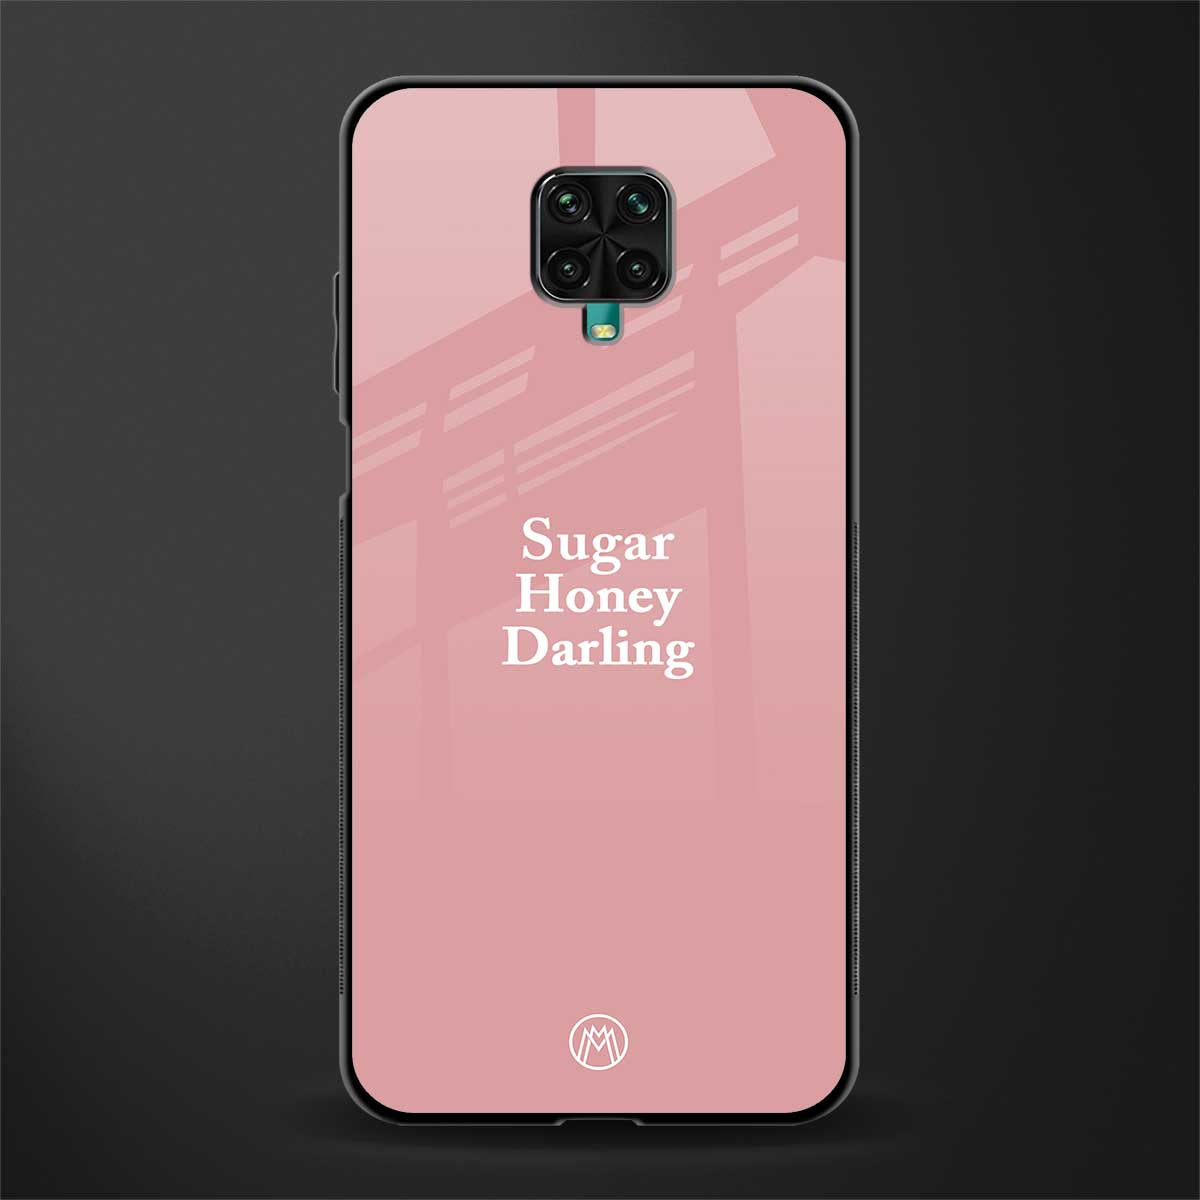 suger honey darling glass case for redmi note 9 pro image